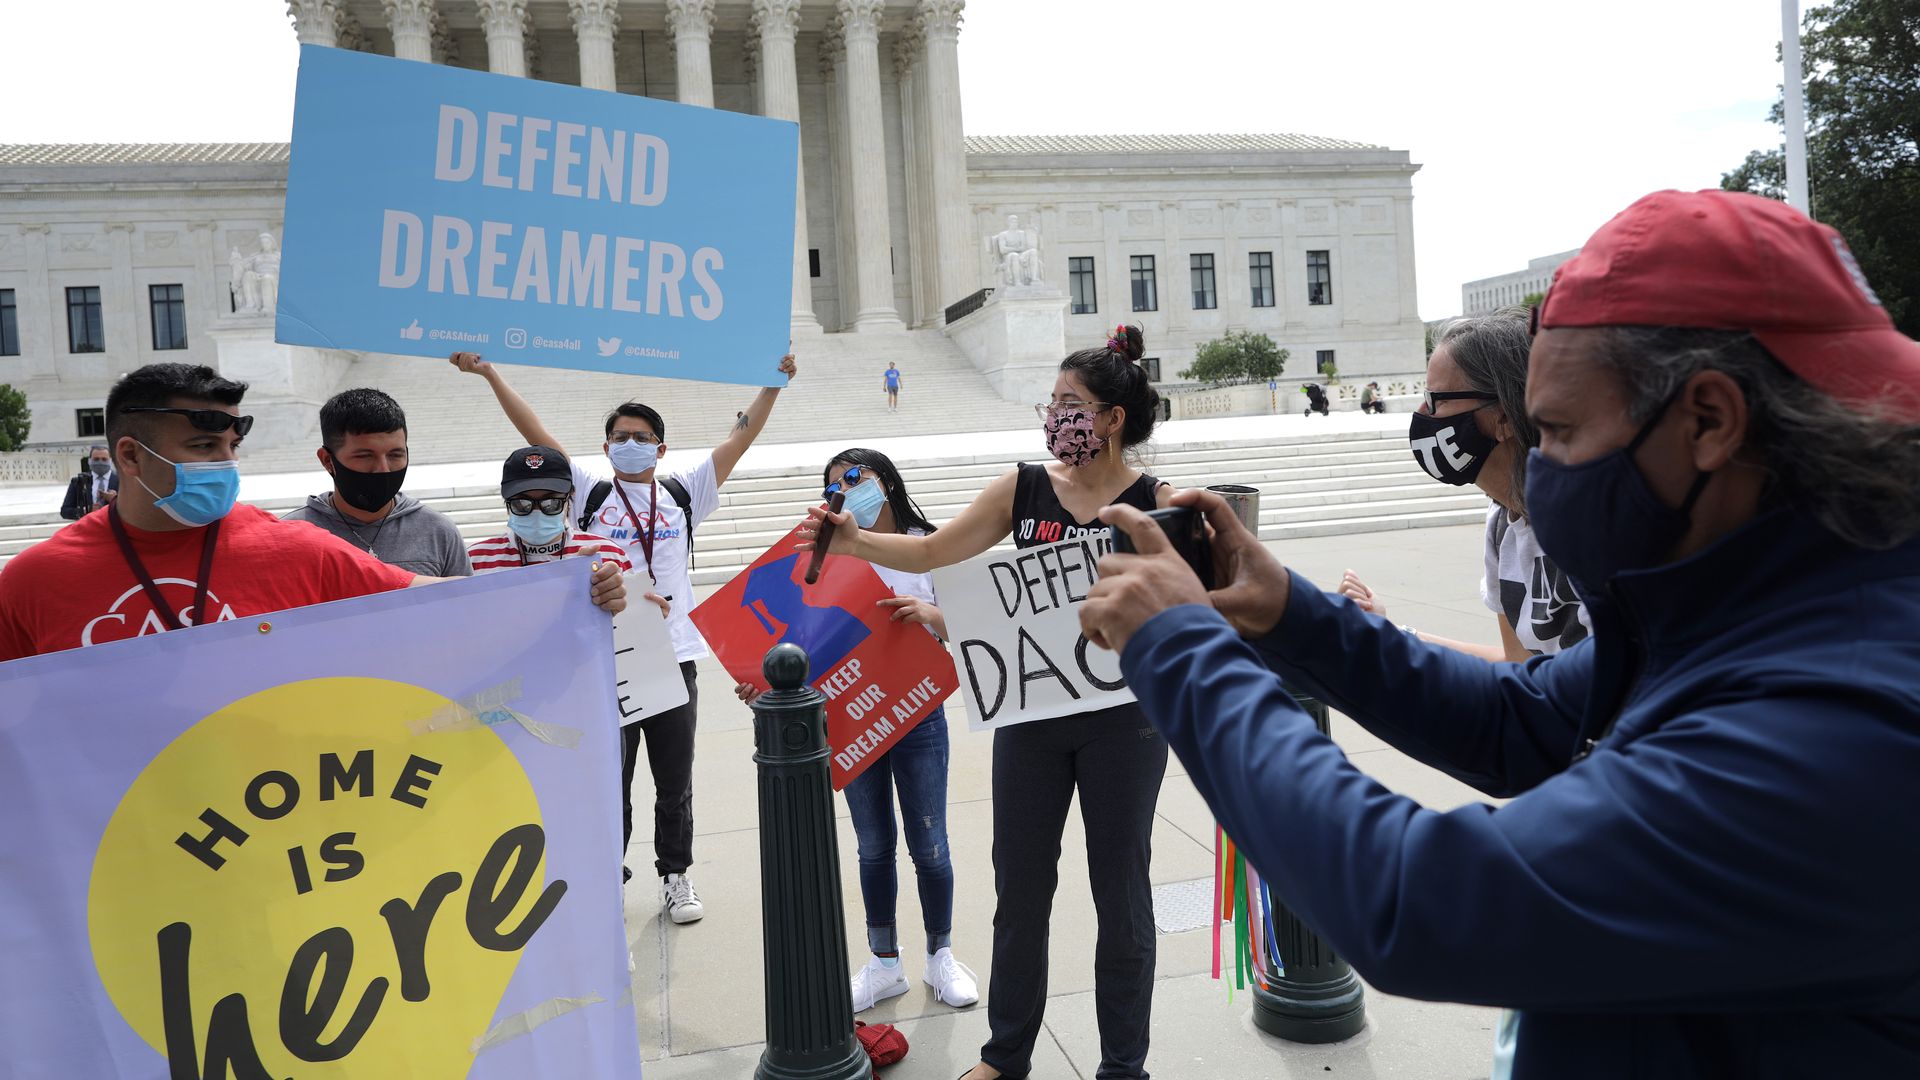 Dreamer advocates holding signs outside the Supreme Court.